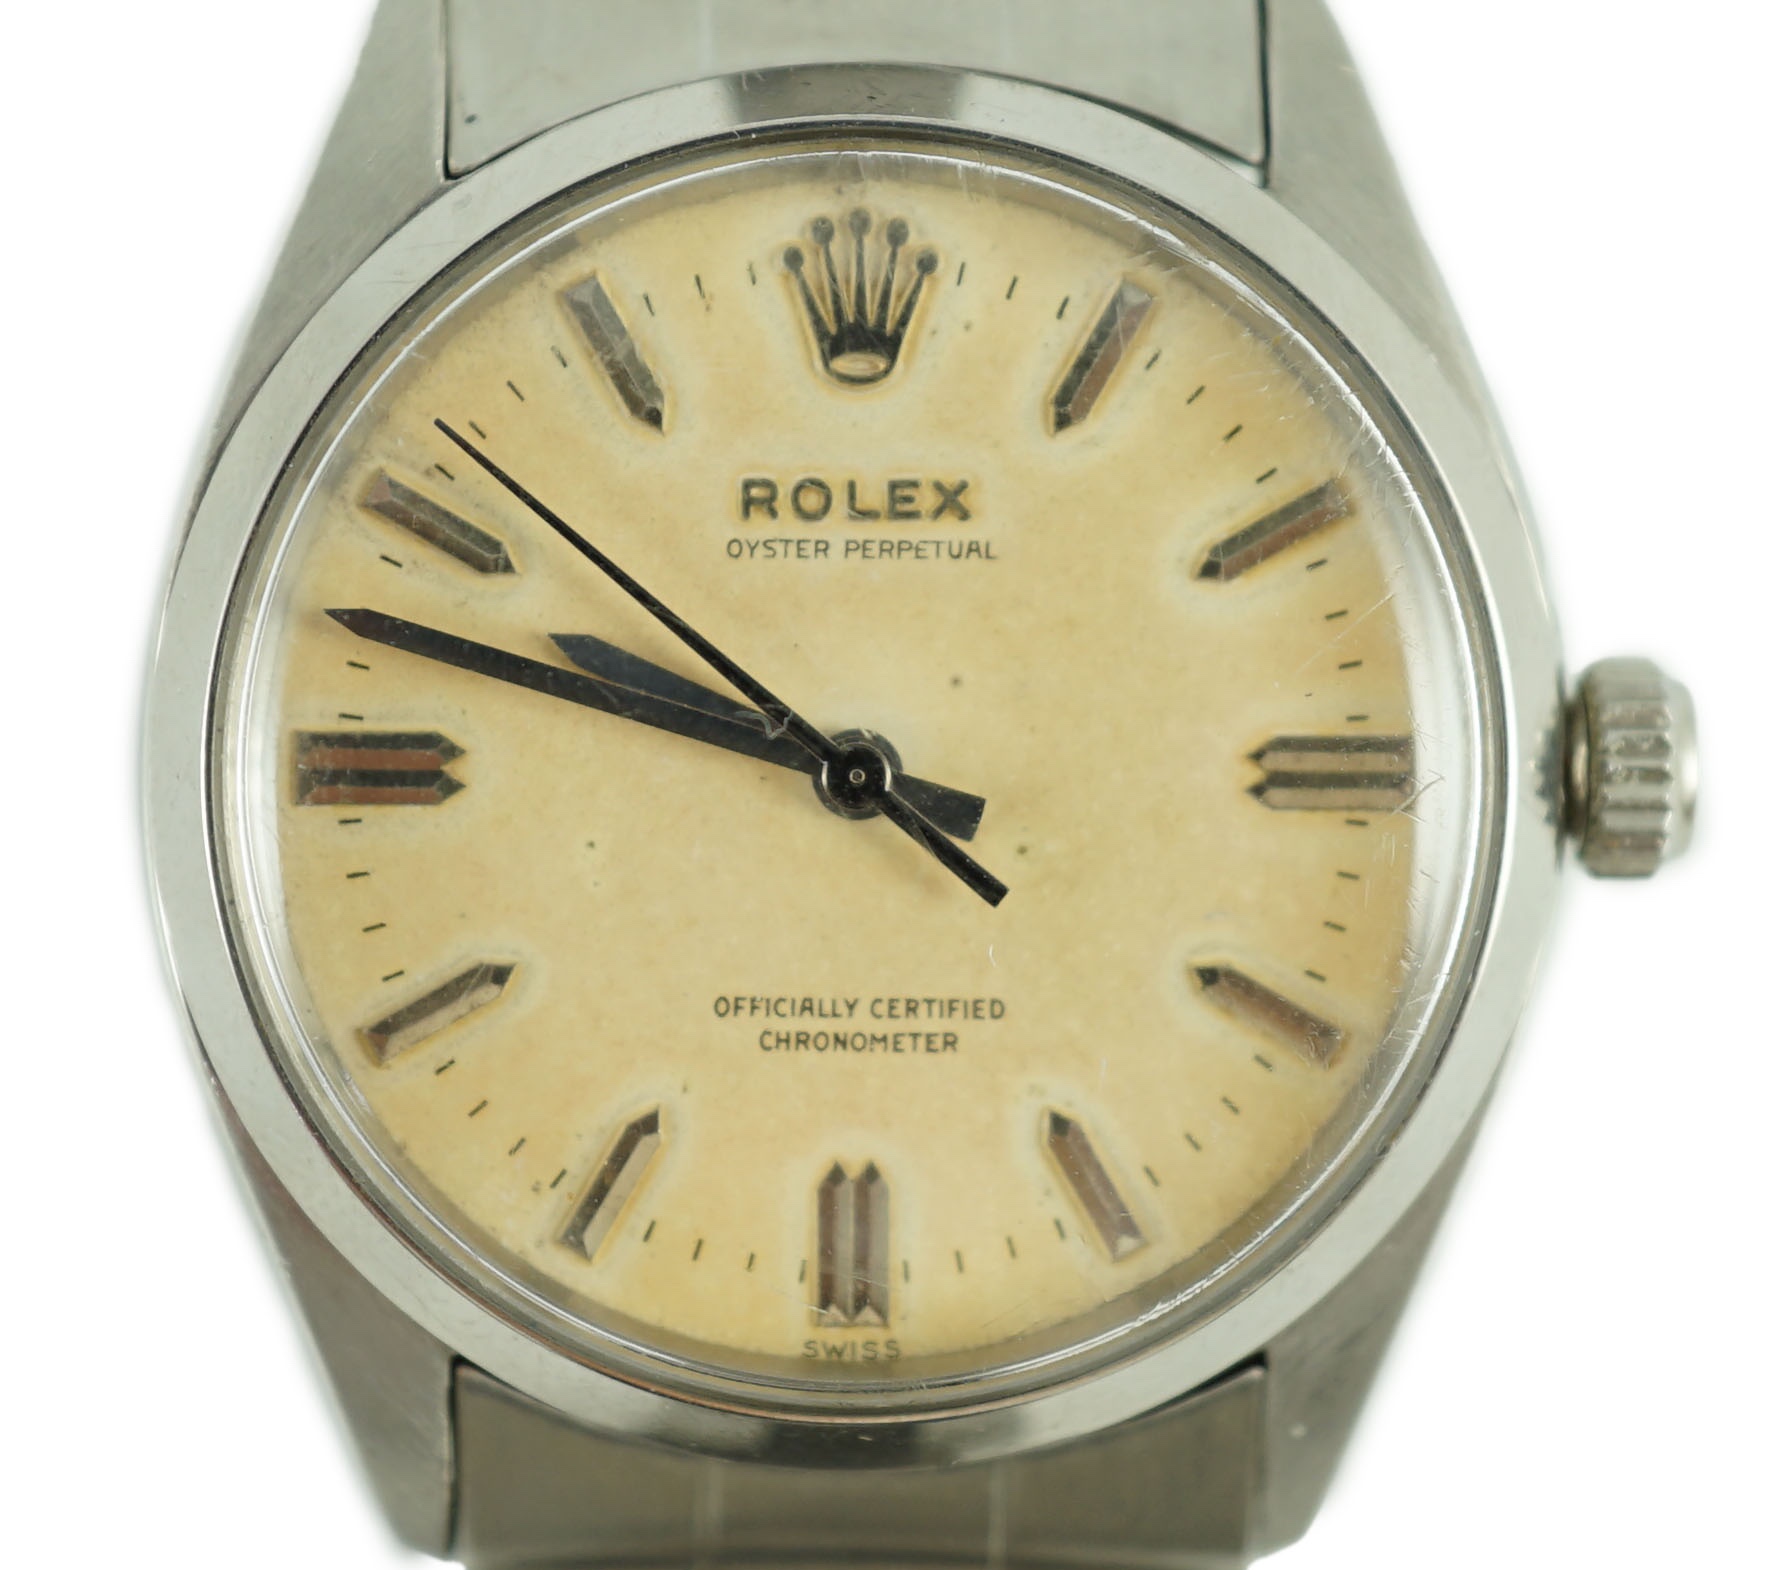 A gentleman's 1950's stainless steel Rolex Oyster Perpetual wrist watch